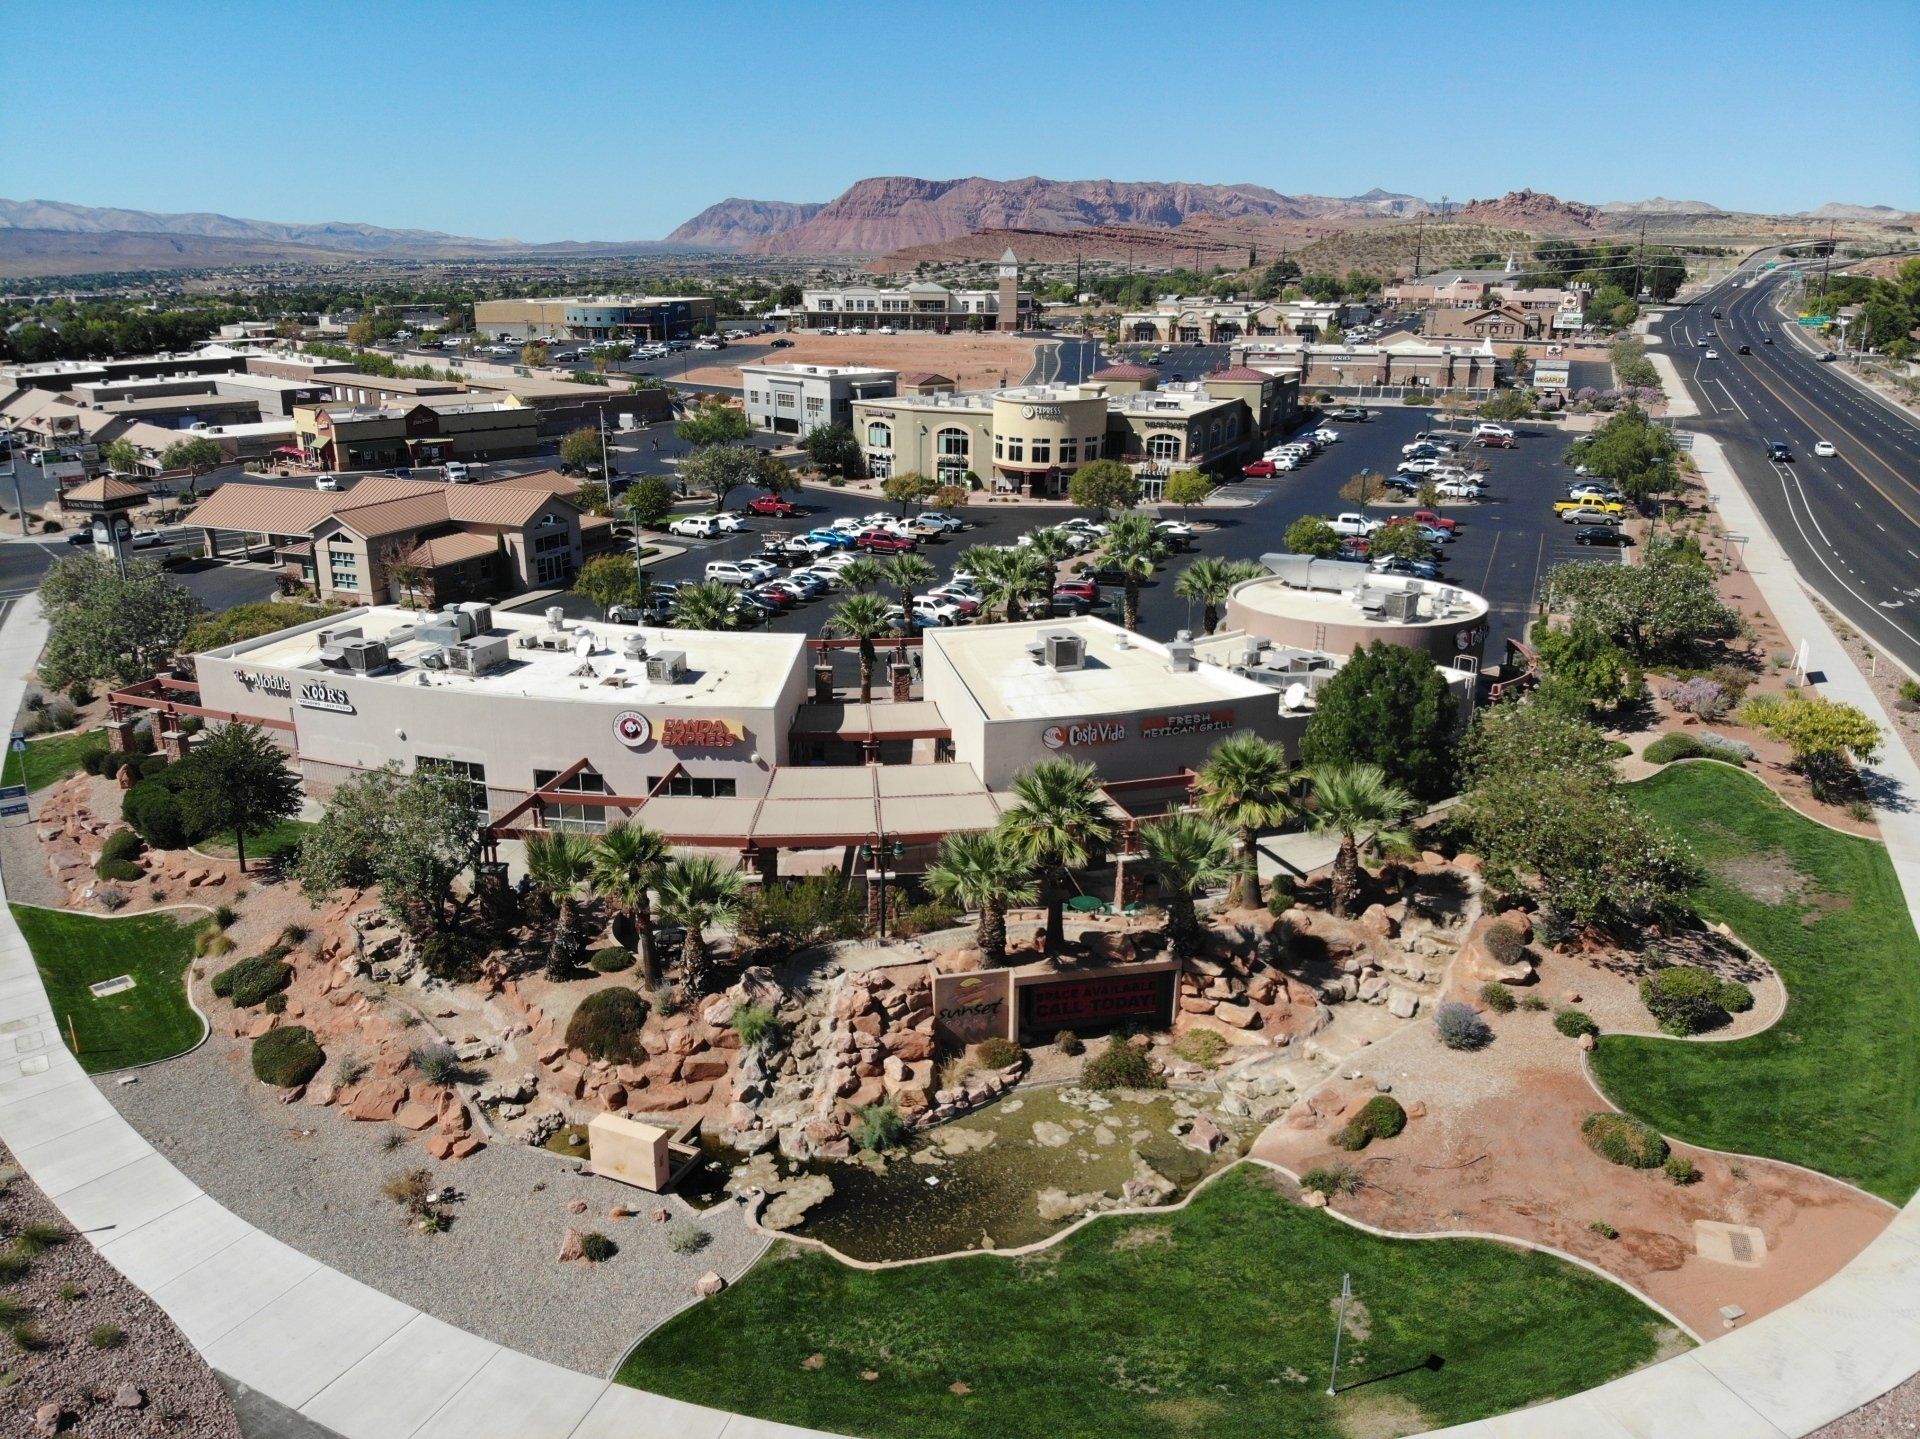 The properties JMI Property Services manages throughout Southern Utah & St. George